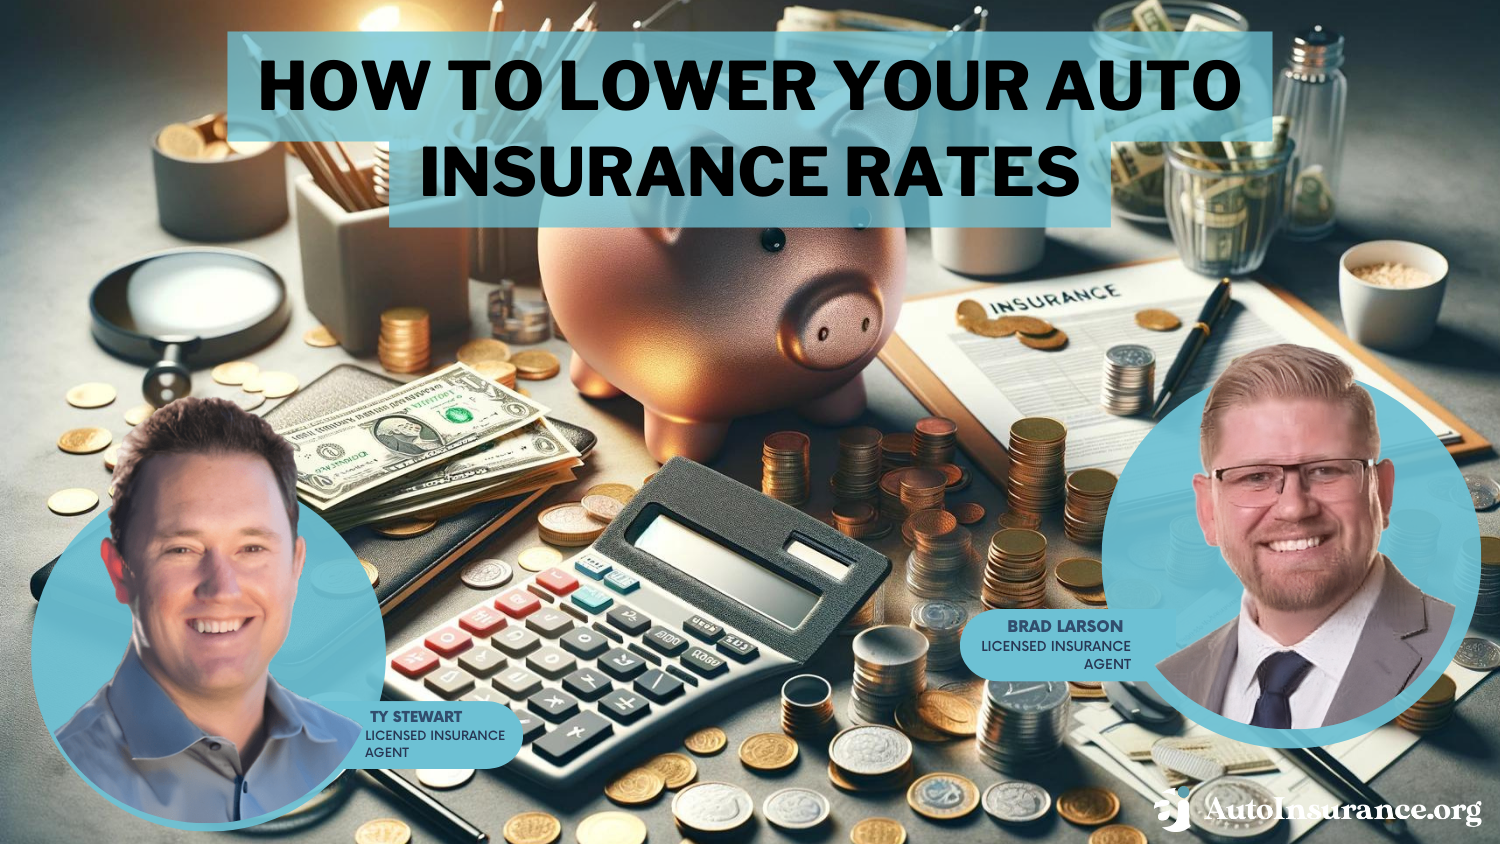 How to Lower Your Auto Insurance Rates